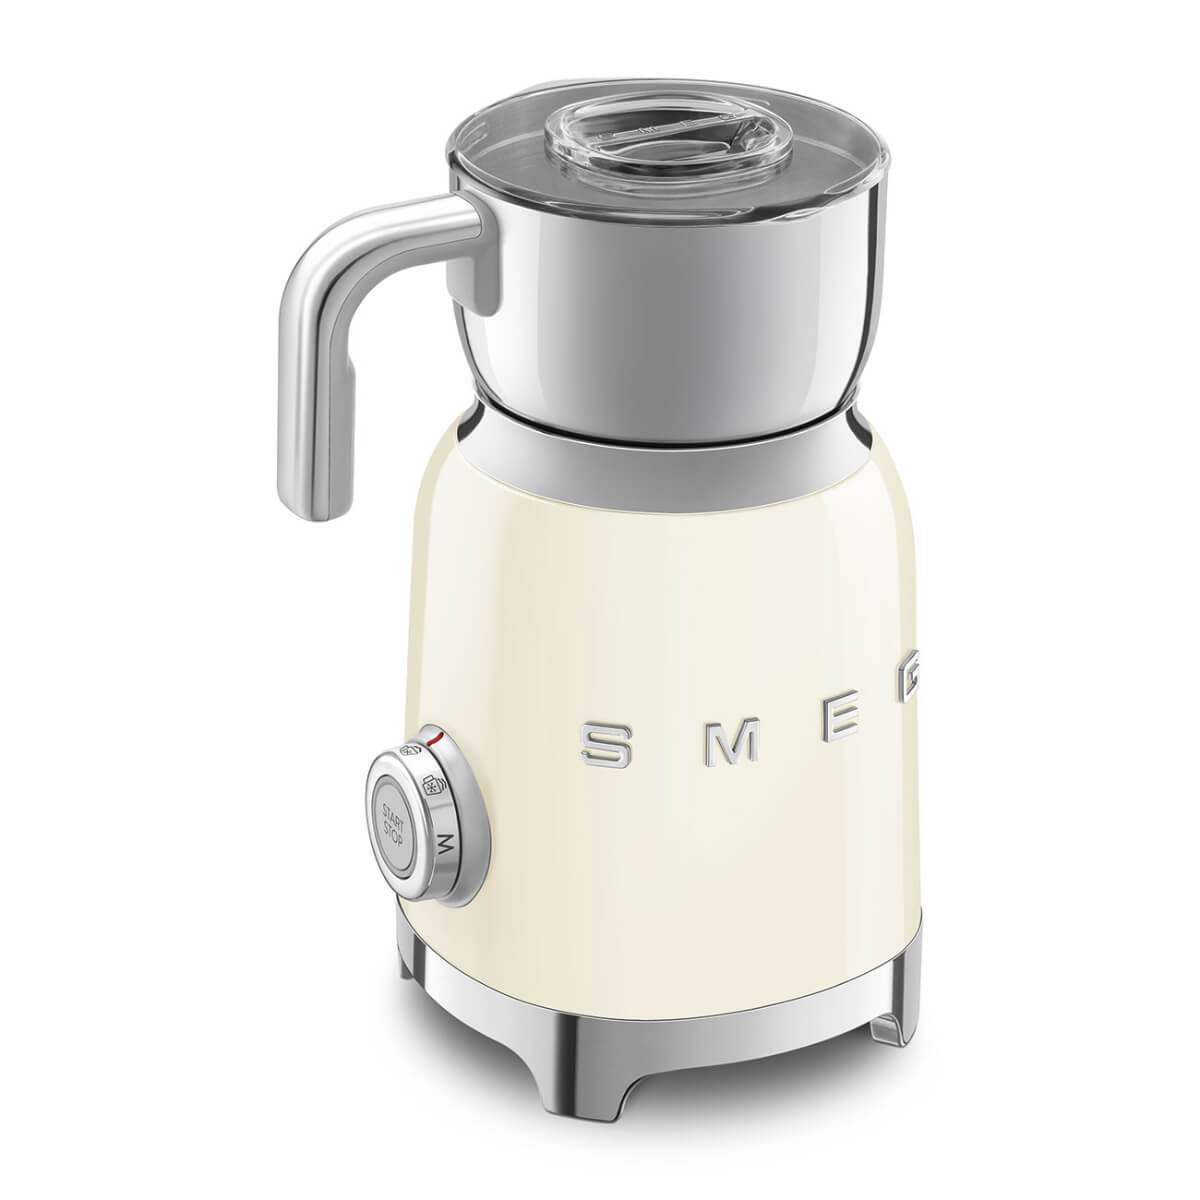 Smeg 50's Style Milk Frother - Cream Color